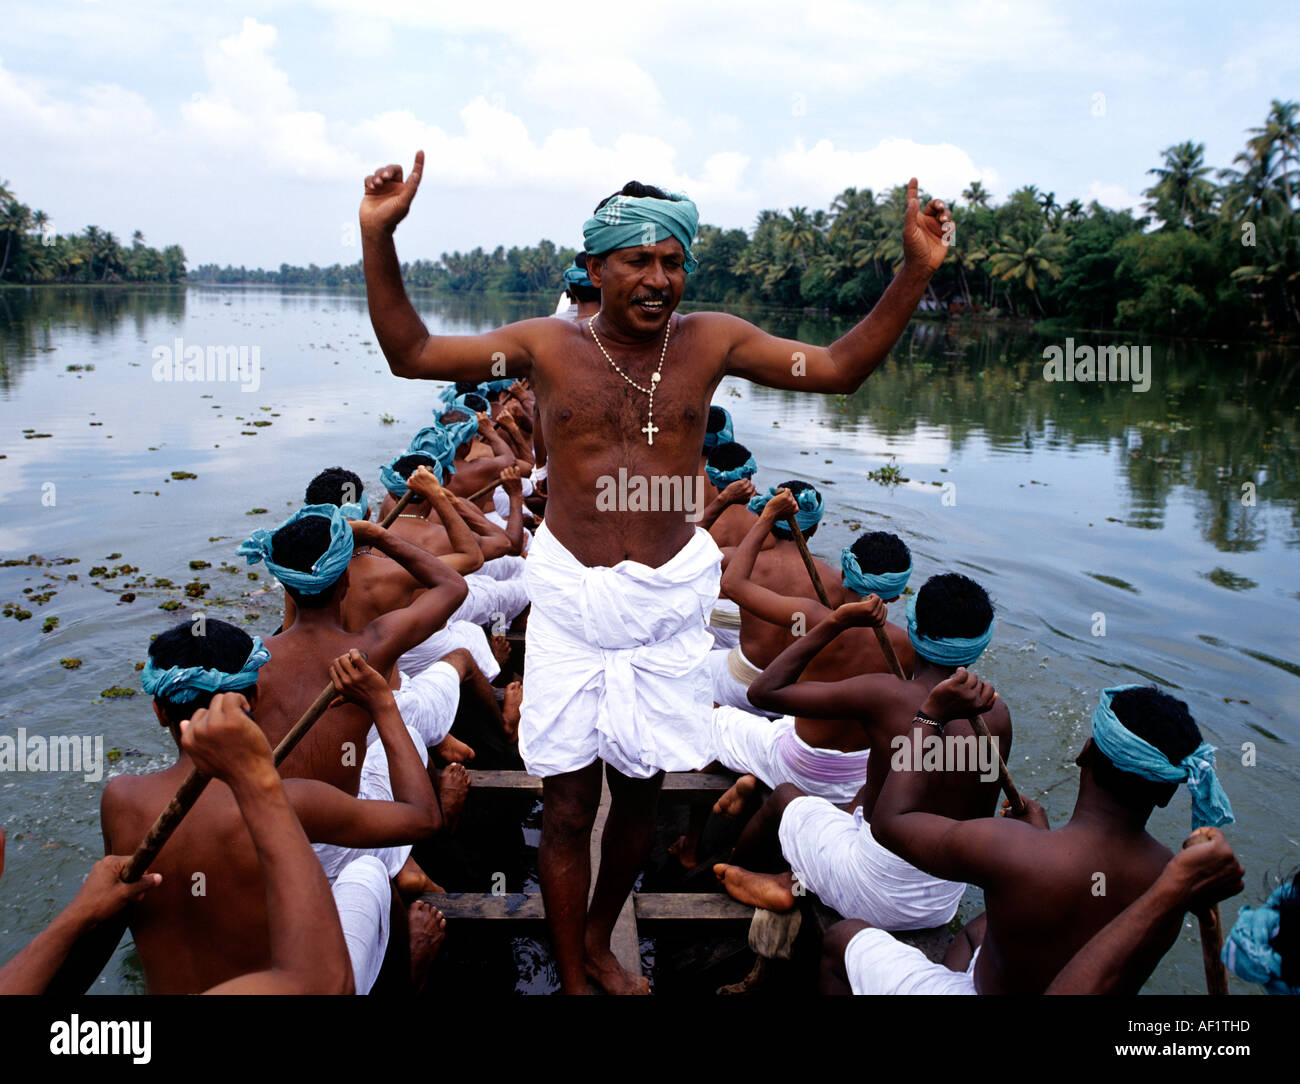 SNAKE BOAT RACE OF CHAMPAKULAM ALAPPUZHA, VIEW FROM INSIDE Stock Photo